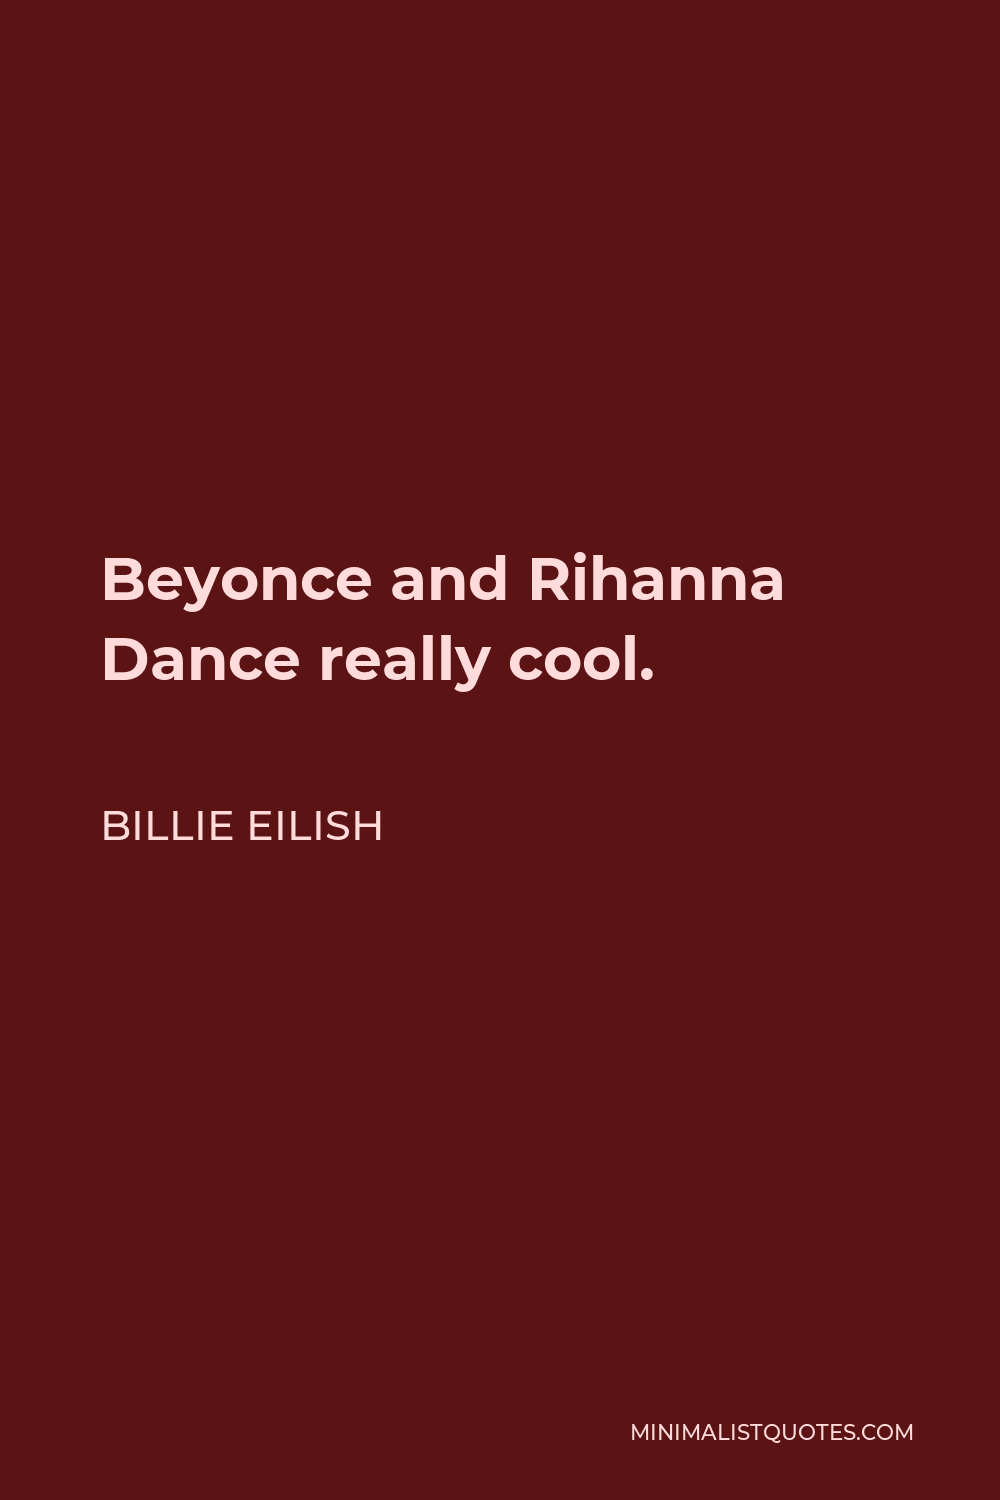 Billie Eilish Quote - Beyonce and Rihanna Dance really cool.